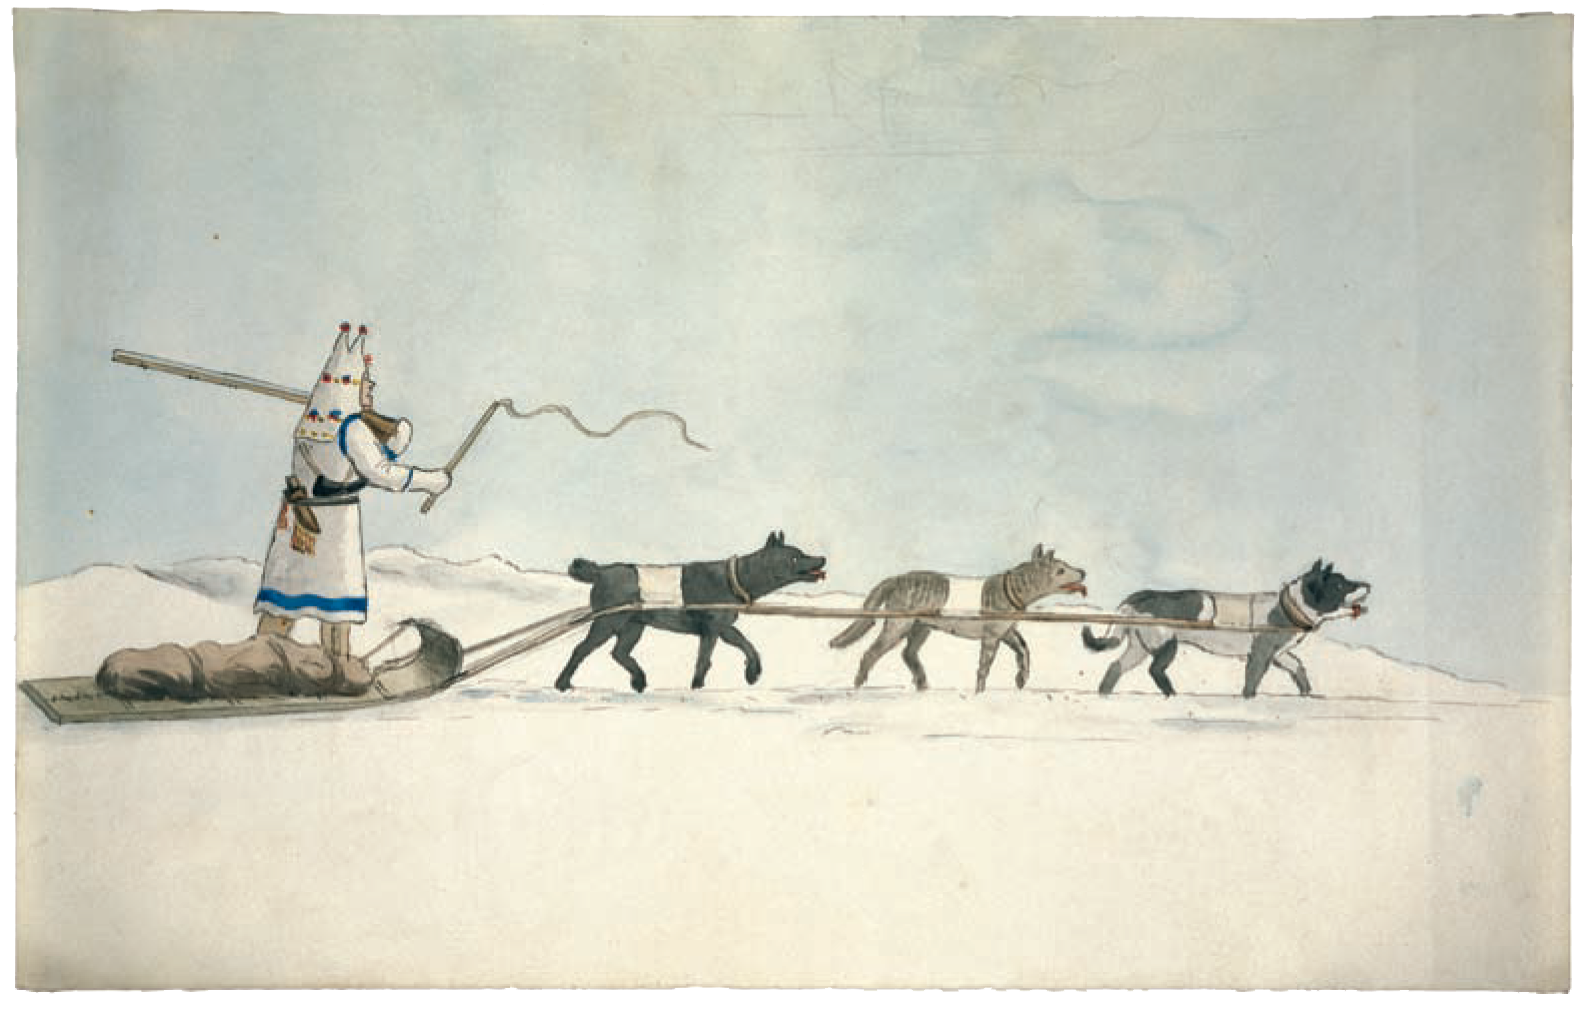 Figure 17.2. Engagé with dogsled on the frozen river. Separately drawn by Maximilian. Faint, unrelated pencil sketches at the bottom have been removed in this reproduction.